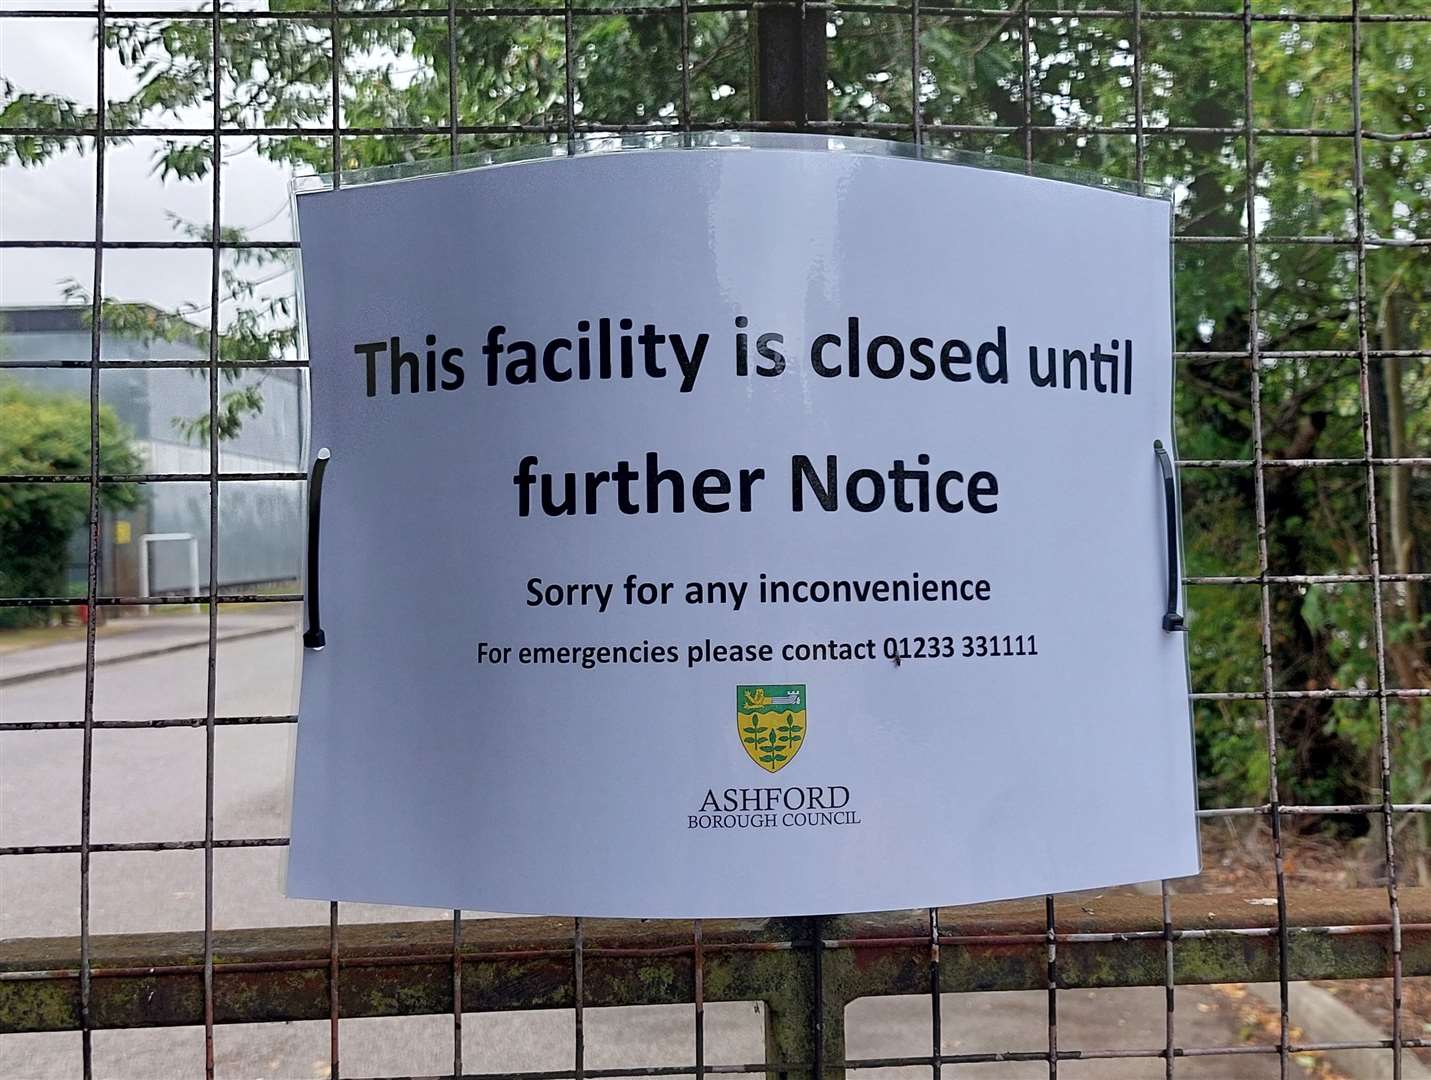 The Courtside and Pitchside facilities in Stanhope were closed throughout August